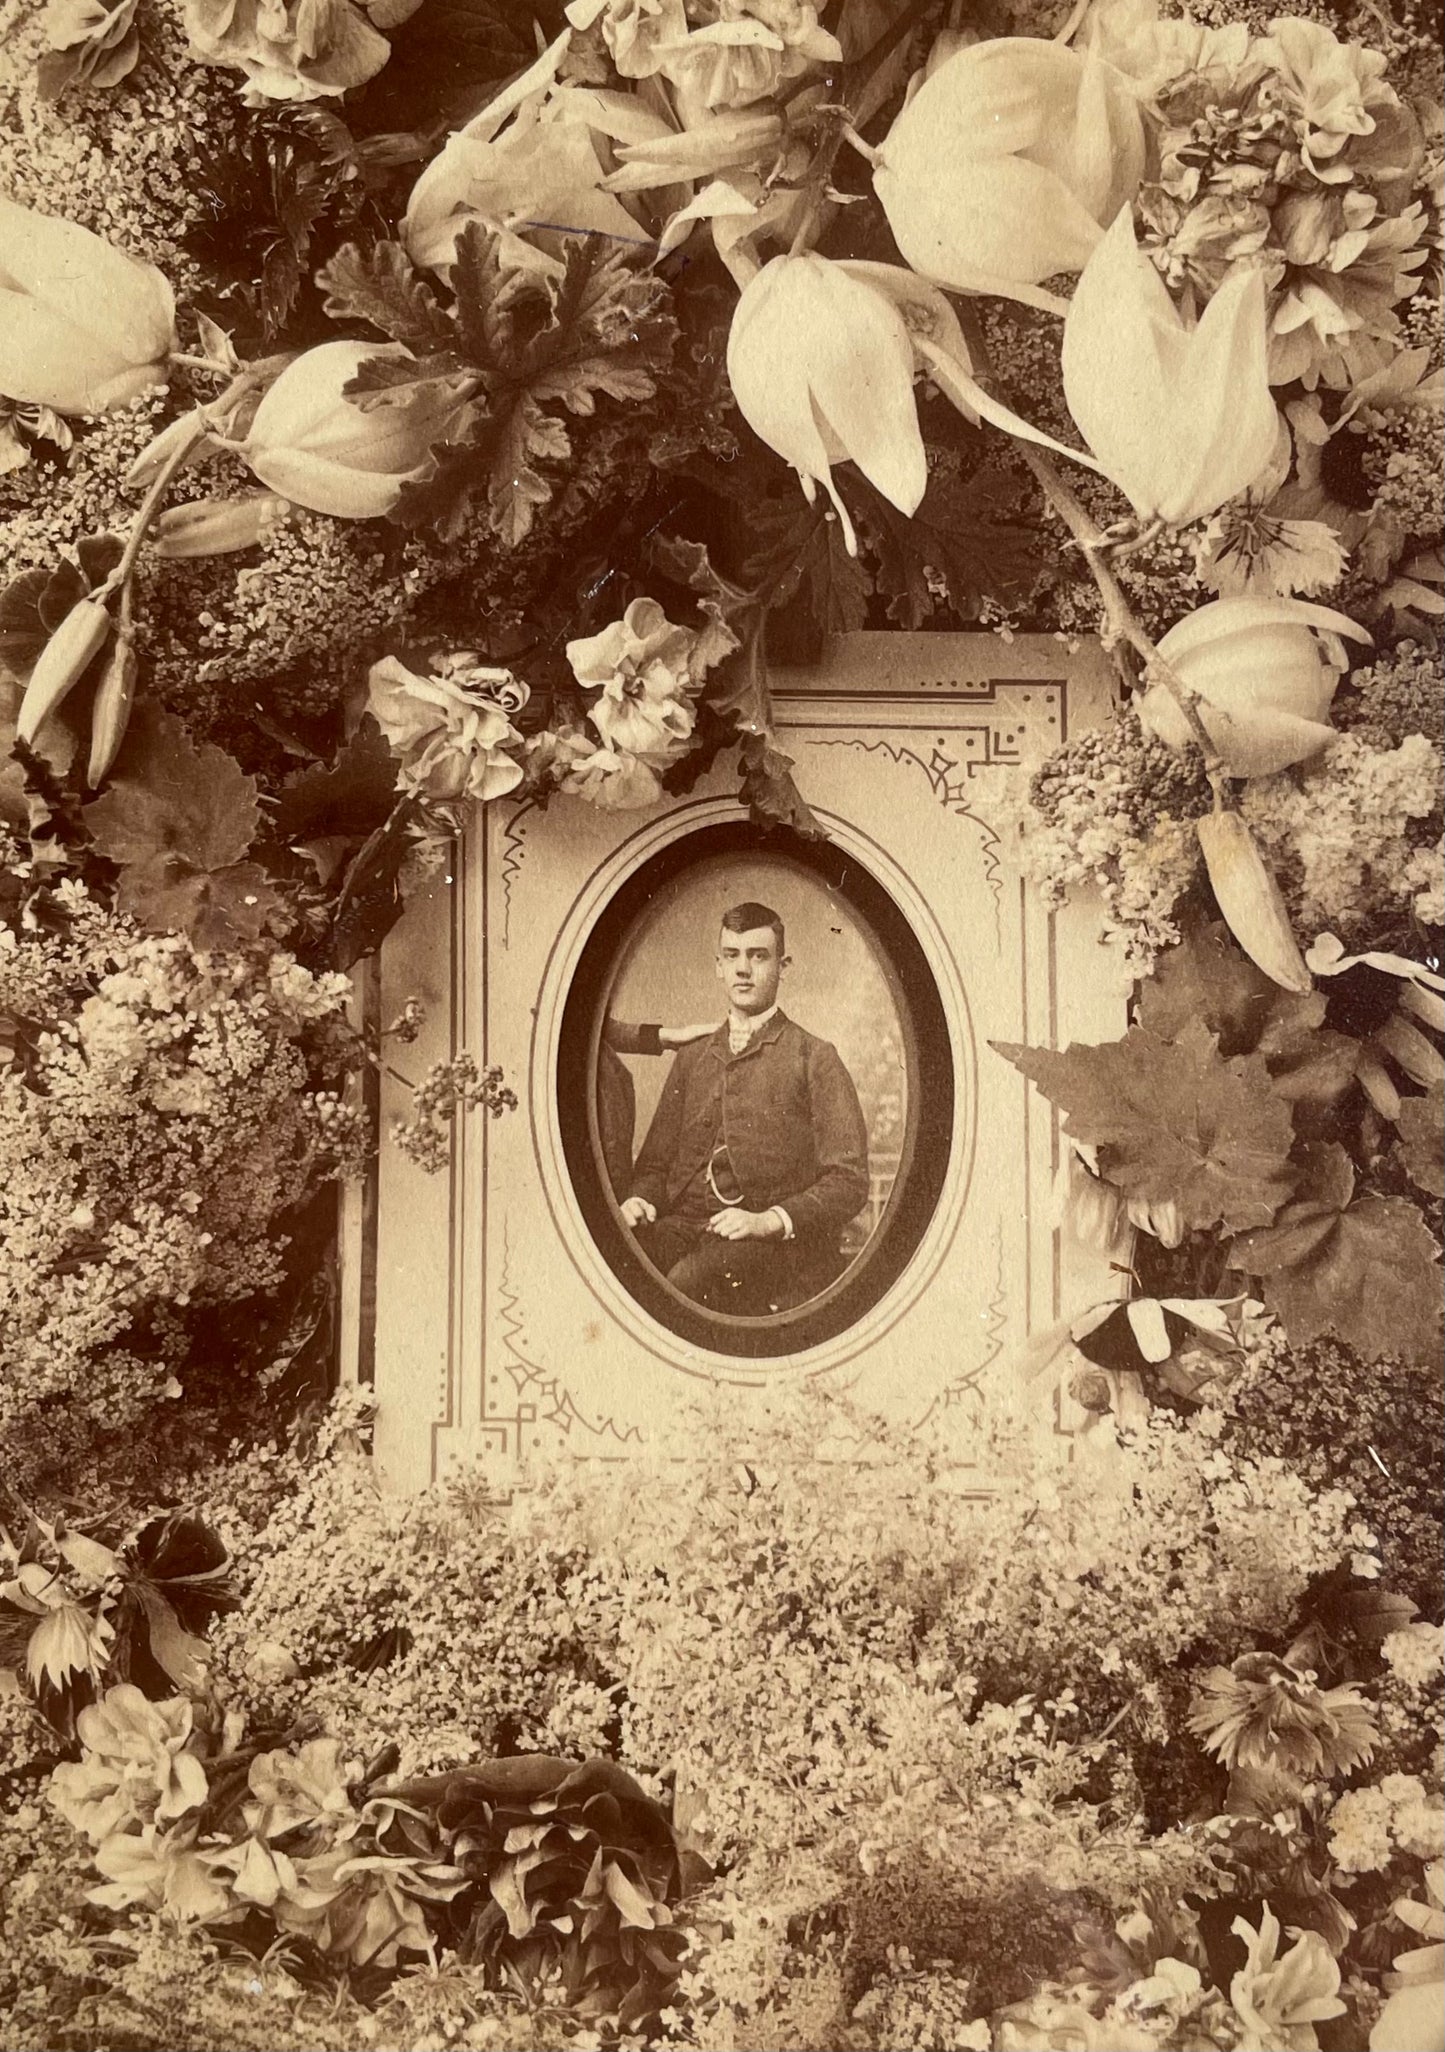 Victorian Funeral Flowers Photo in Oval Frame